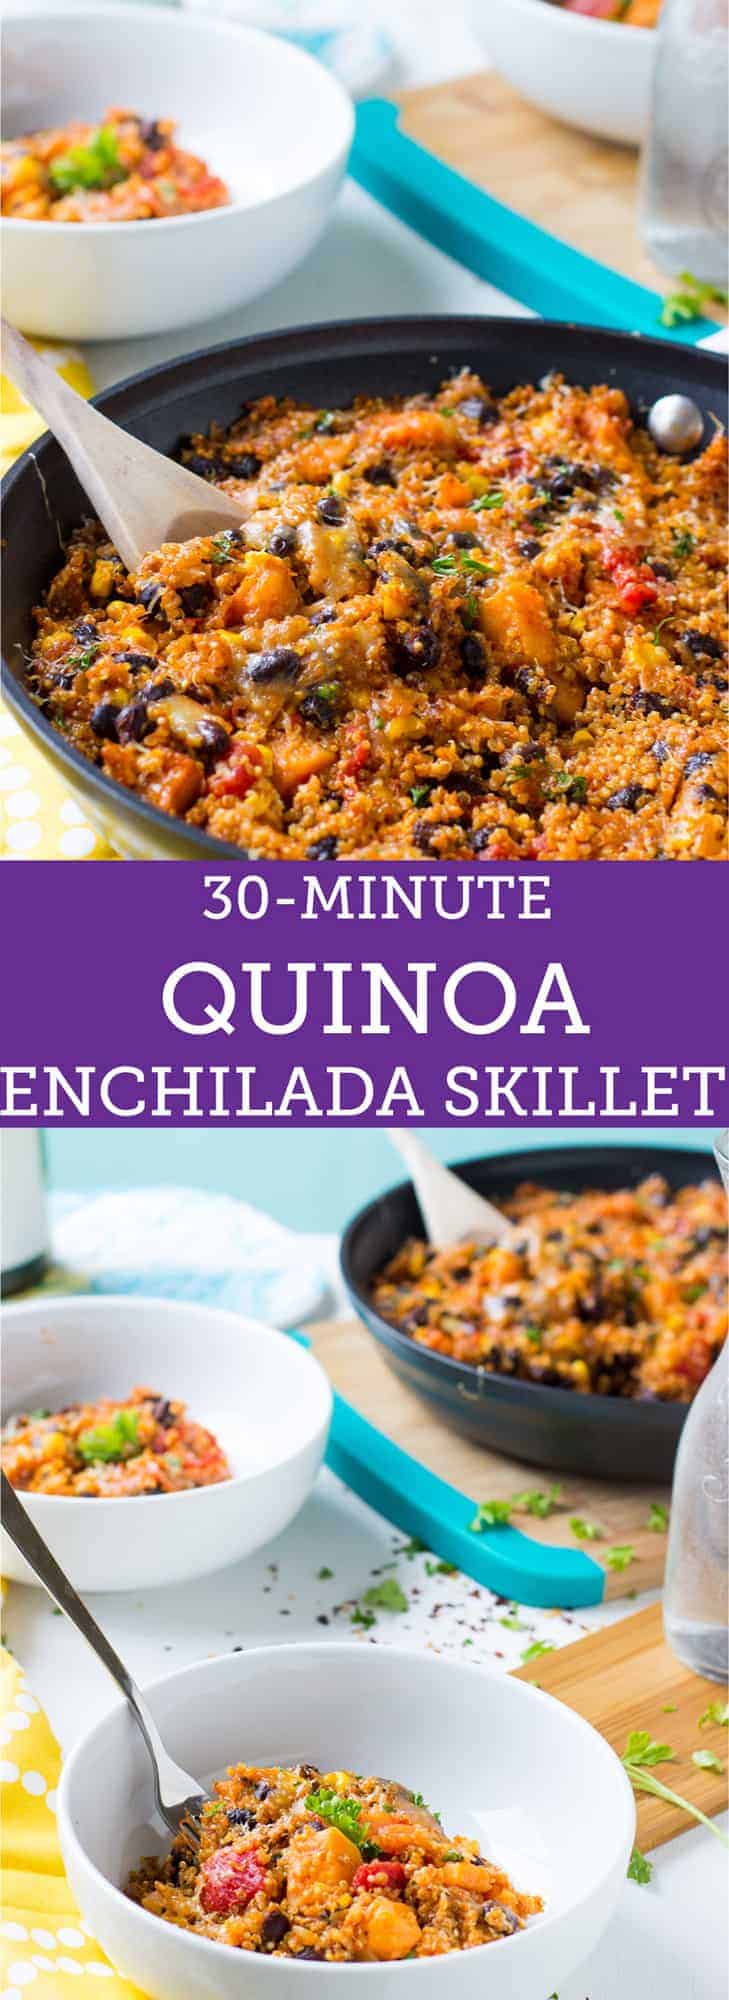 This entire quinoa enchilada skillet is done from start to finish in 30 minutes in ONE pot! It's a healthy, nutritious & flavorful family-friendly dish!